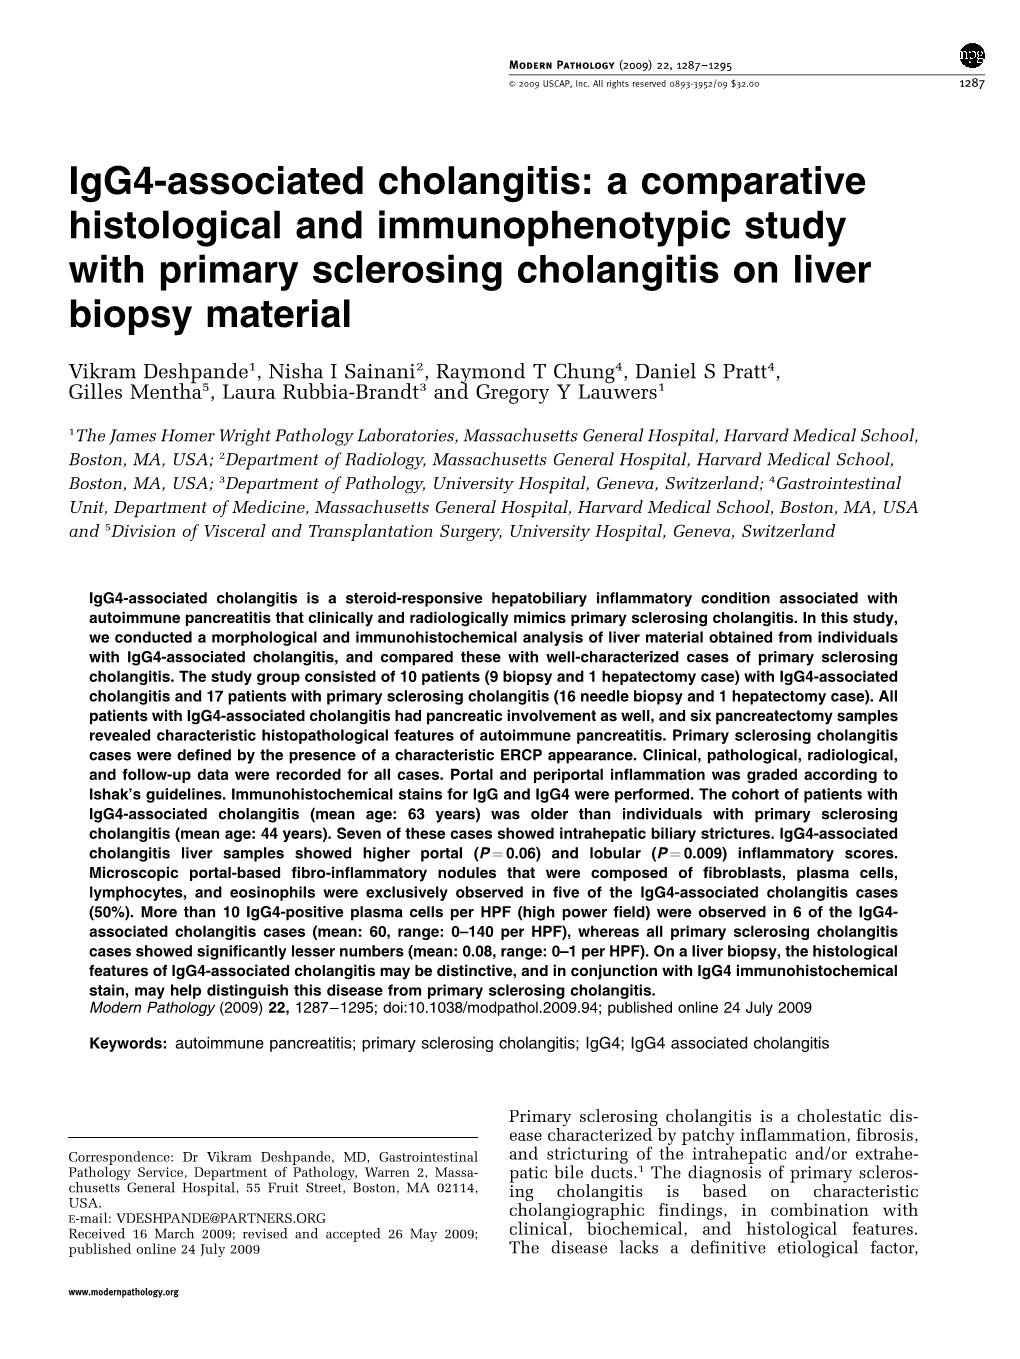 Igg4-Associated Cholangitis: a Comparative Histological and Immunophenotypic Study with Primary Sclerosing Cholangitis on Liver Biopsy Material